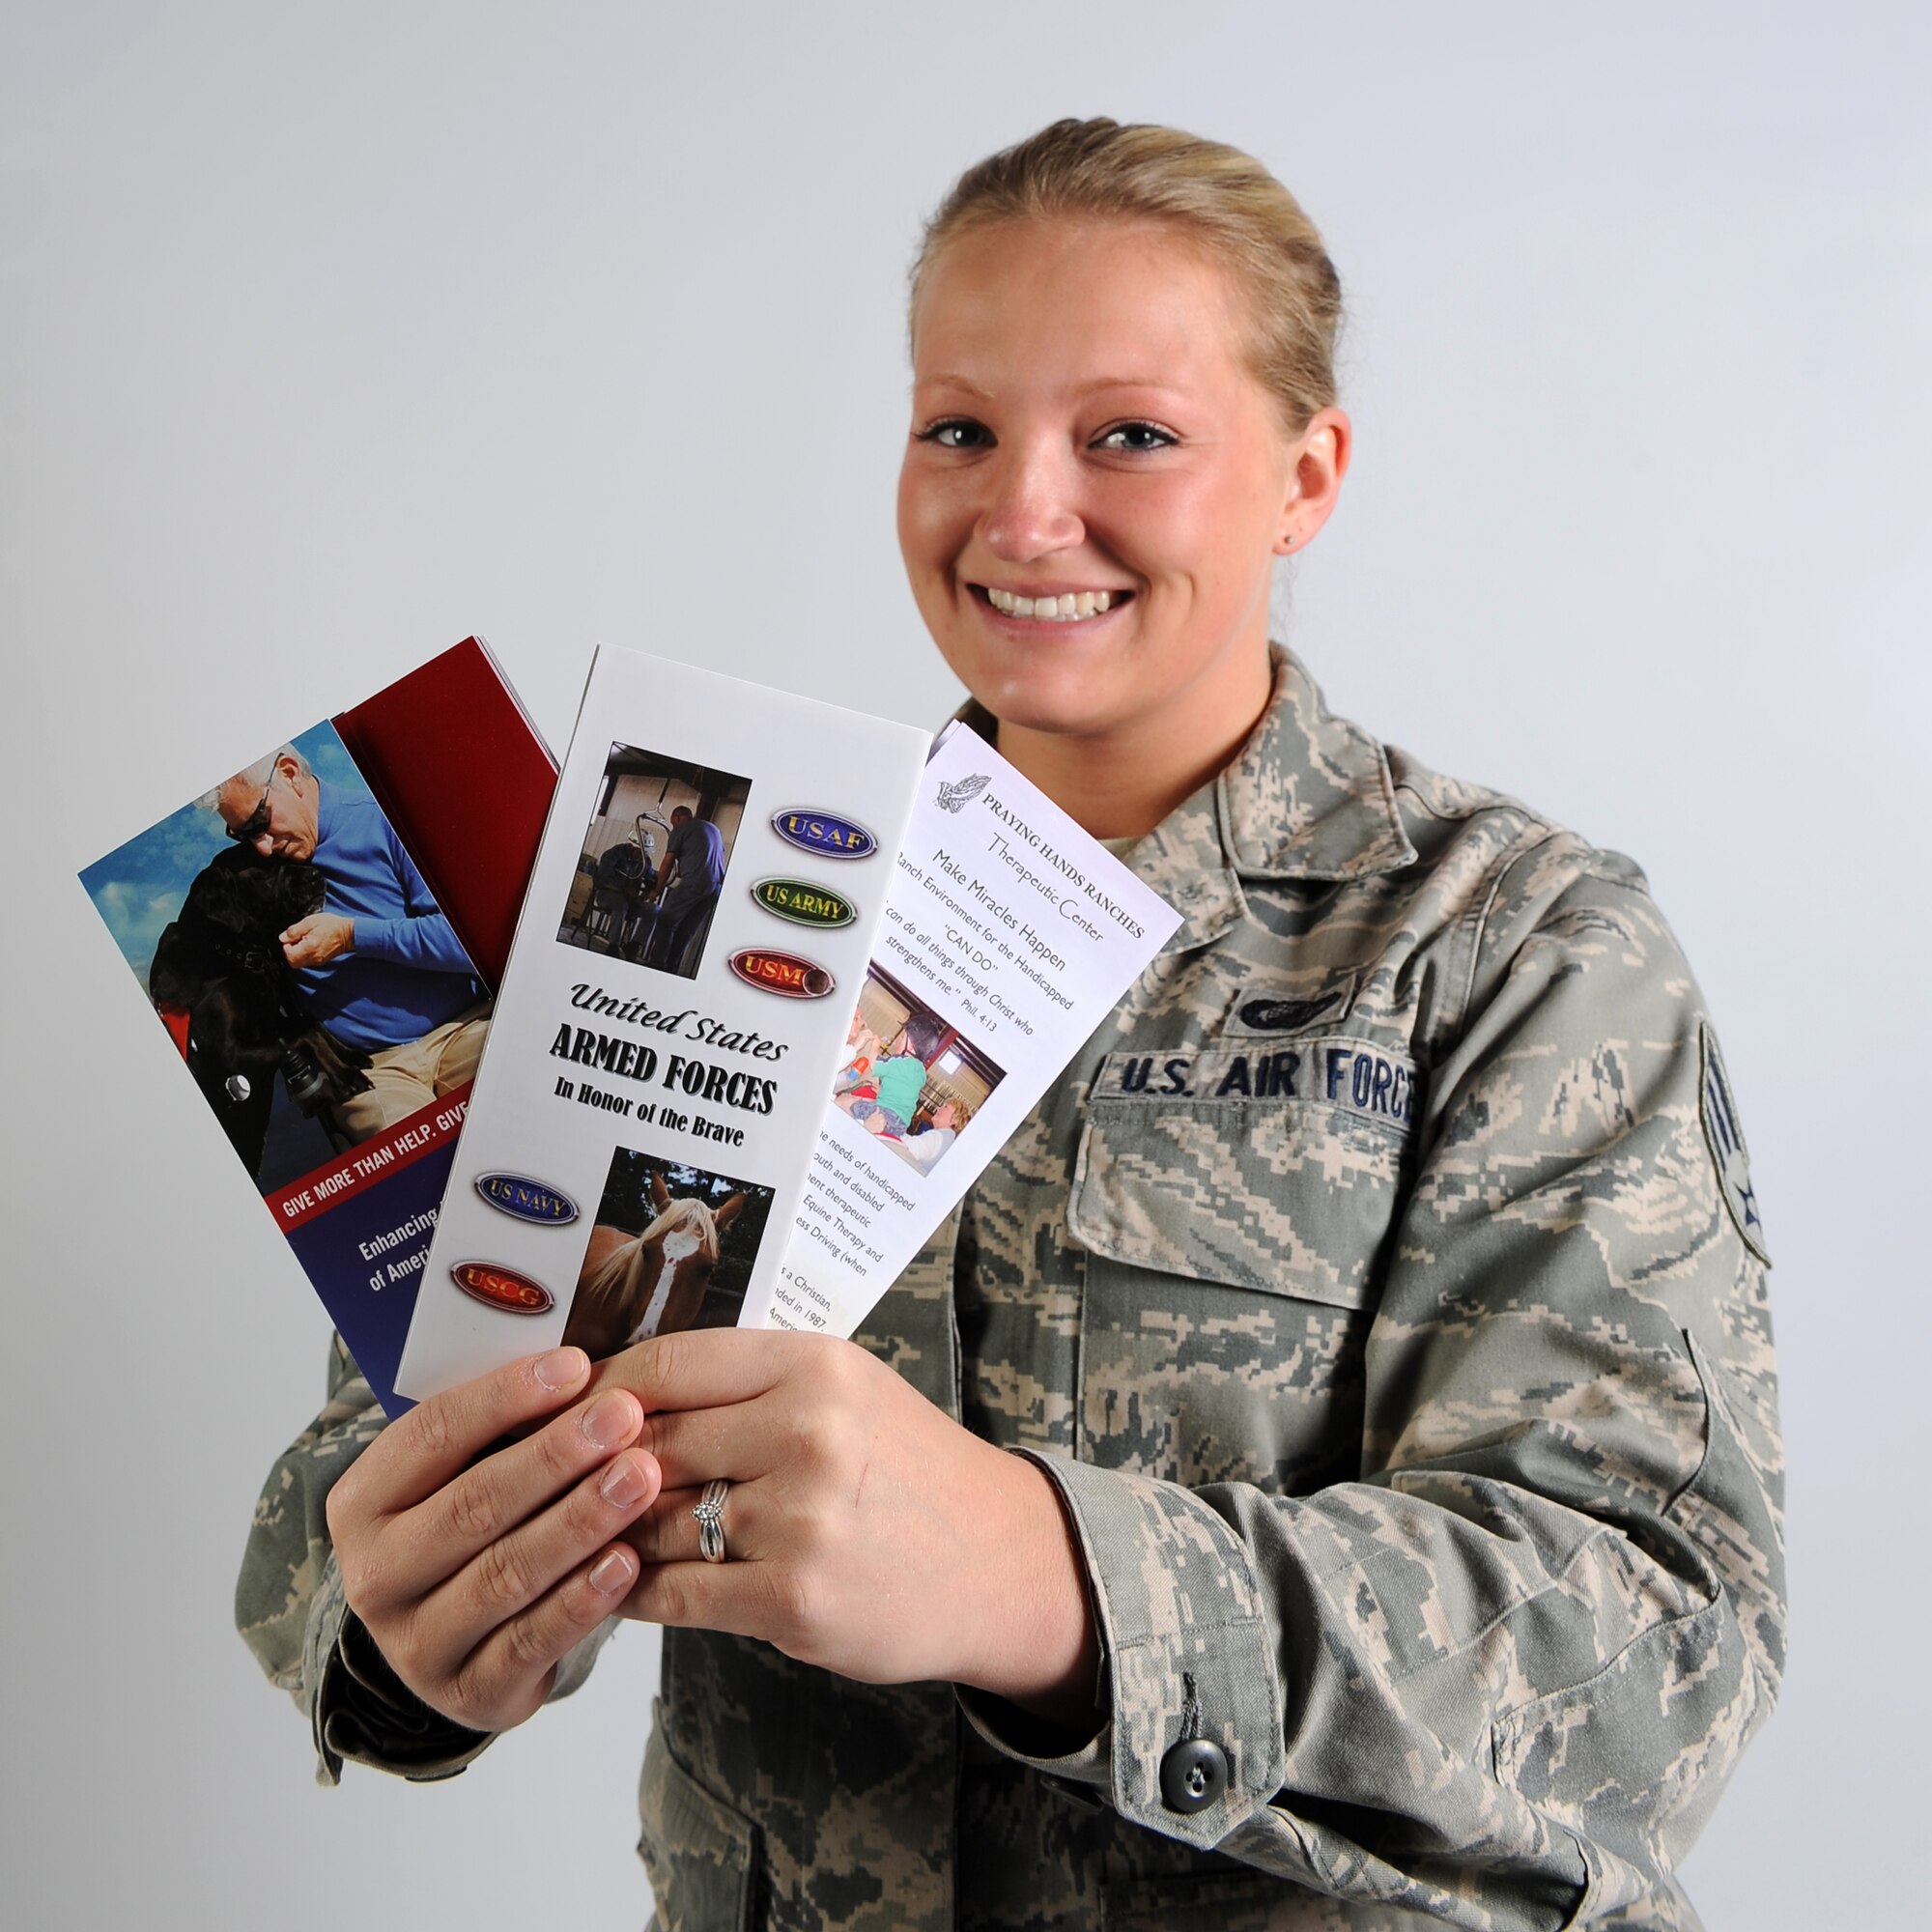 BUCKLEY AIR FORCE BASE, Colo. – Senior Airman Amy McMillan poses with pamphlets of the organizations she donated to for the 2012 Combined Federal Campaign. “I donate to Praying Hands Ranch and Freedom Service Dogs to help those people that have come back disabled from overseas,” McMillan said. (U.S. Air Force photo by Senior Airman Paul Labbe)